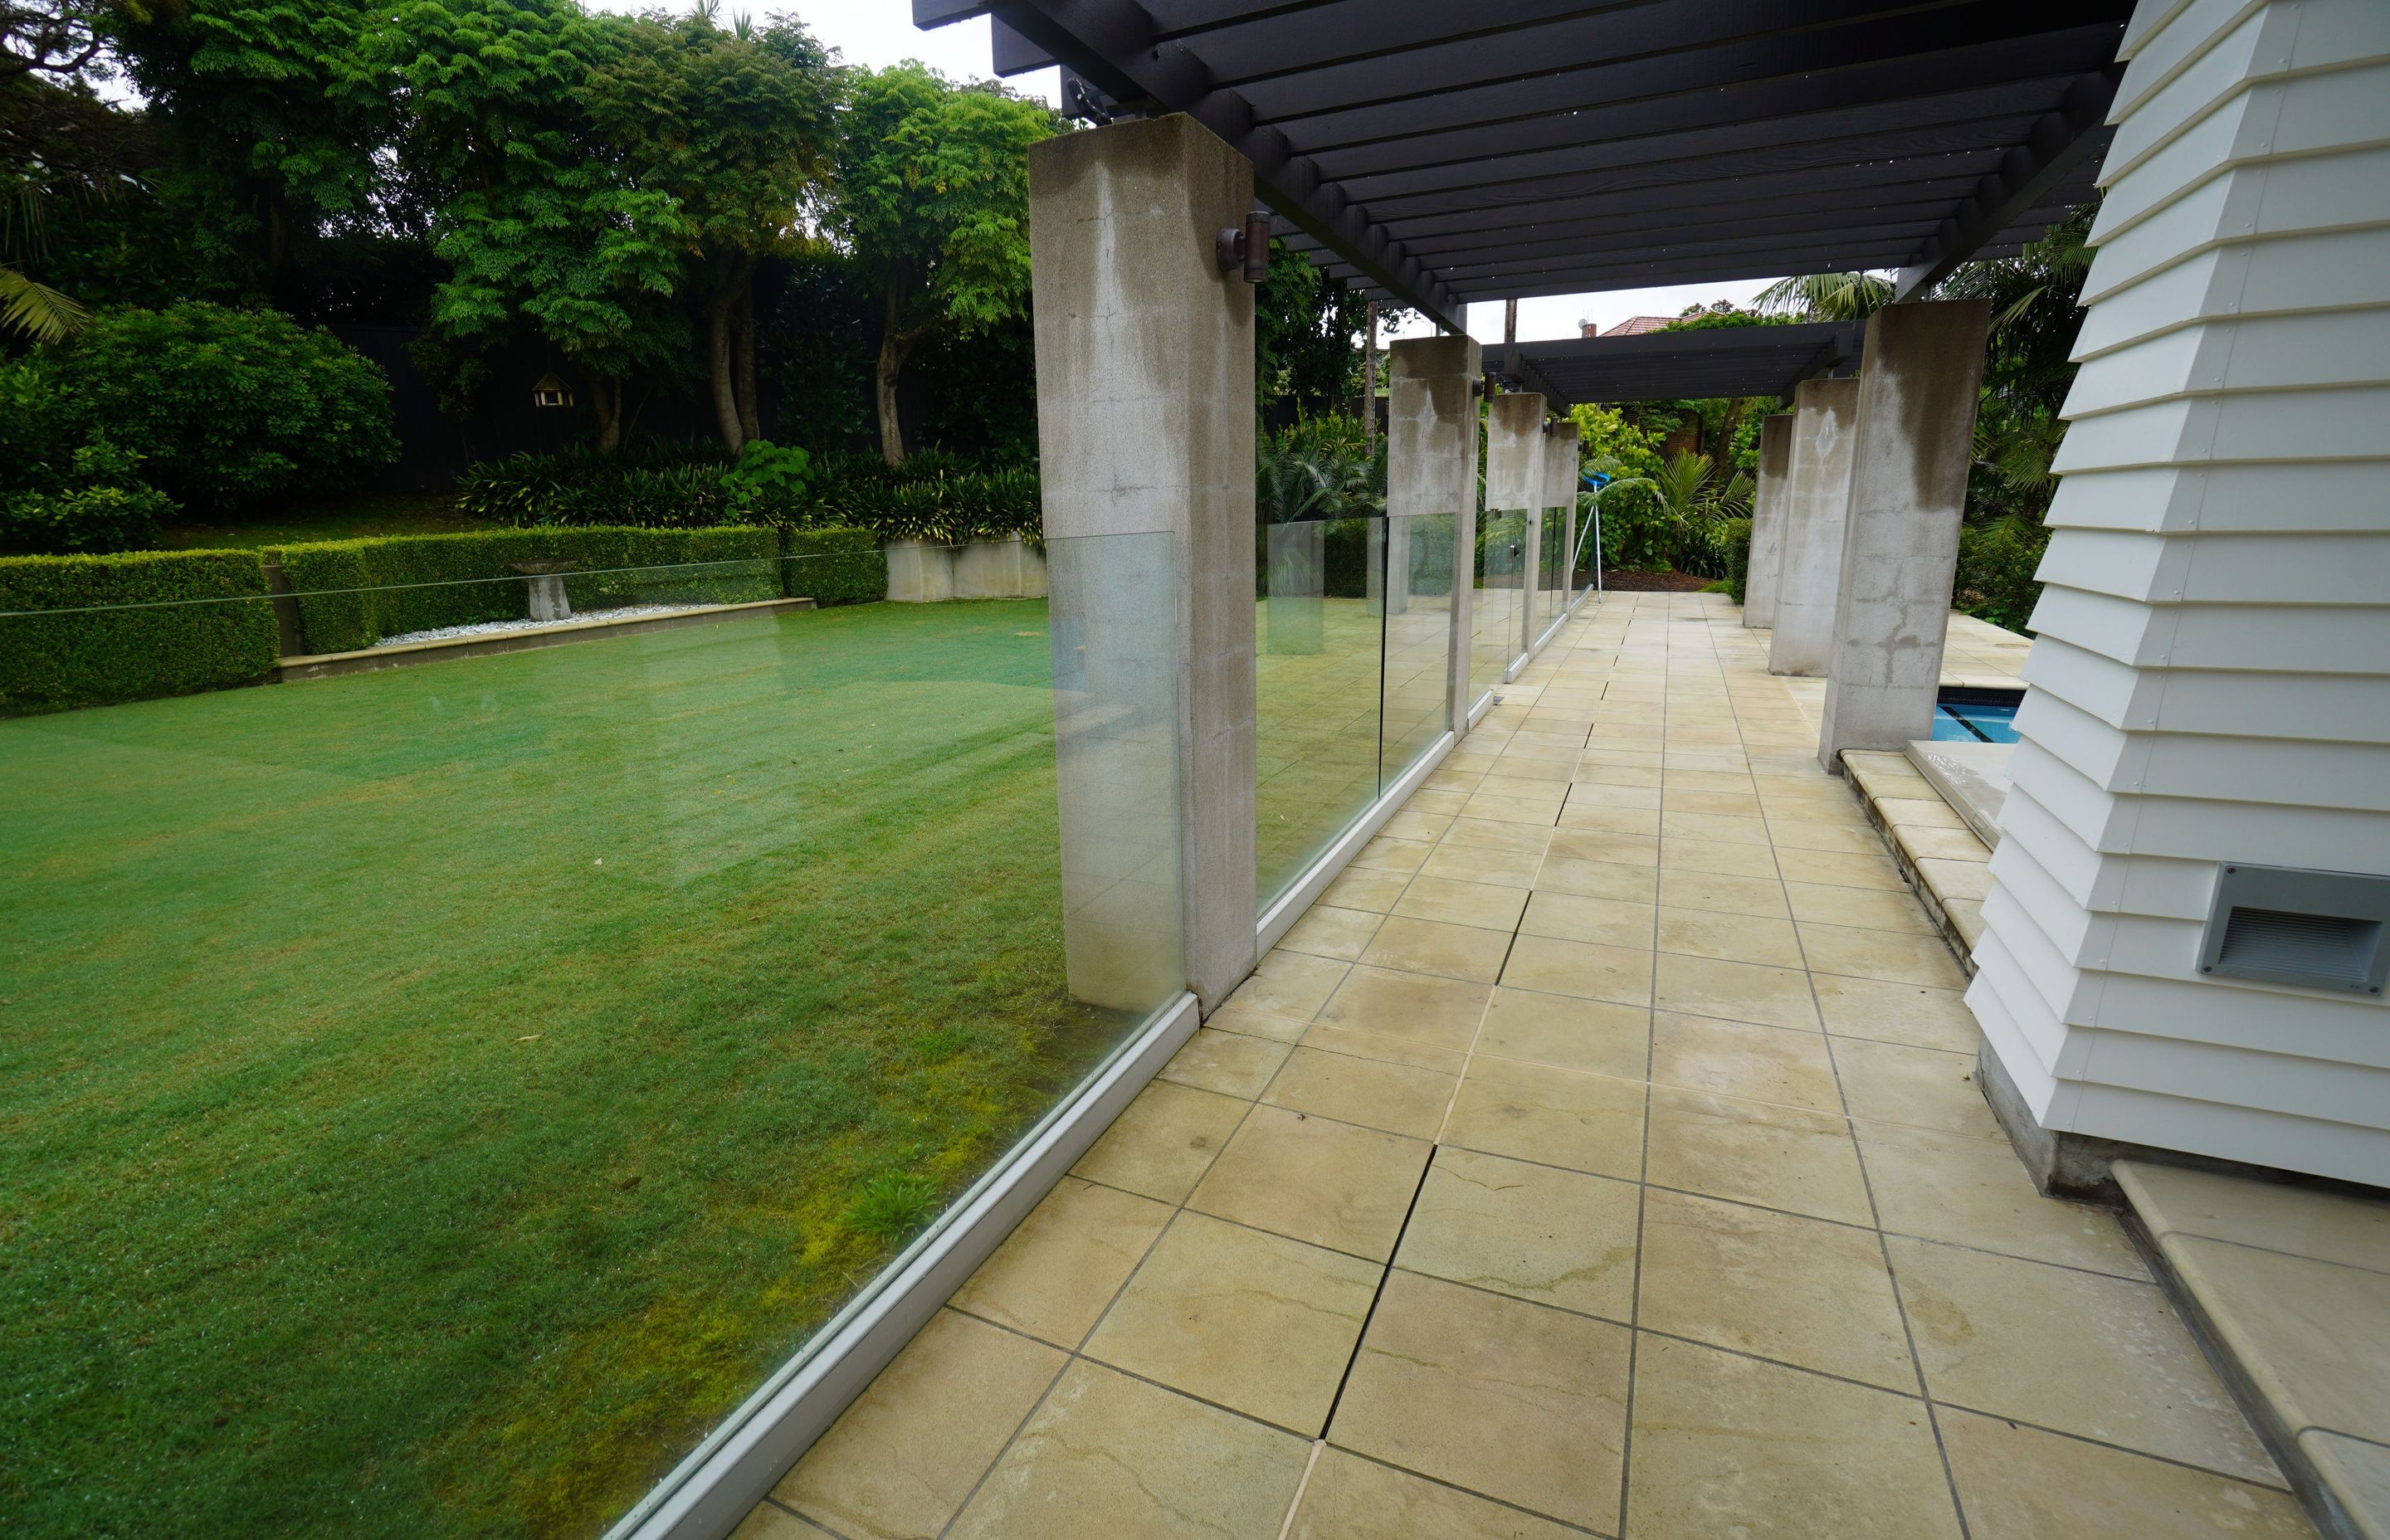 The glass fences are used to divide the different living spaces of the landscape with a different purpose for each area.